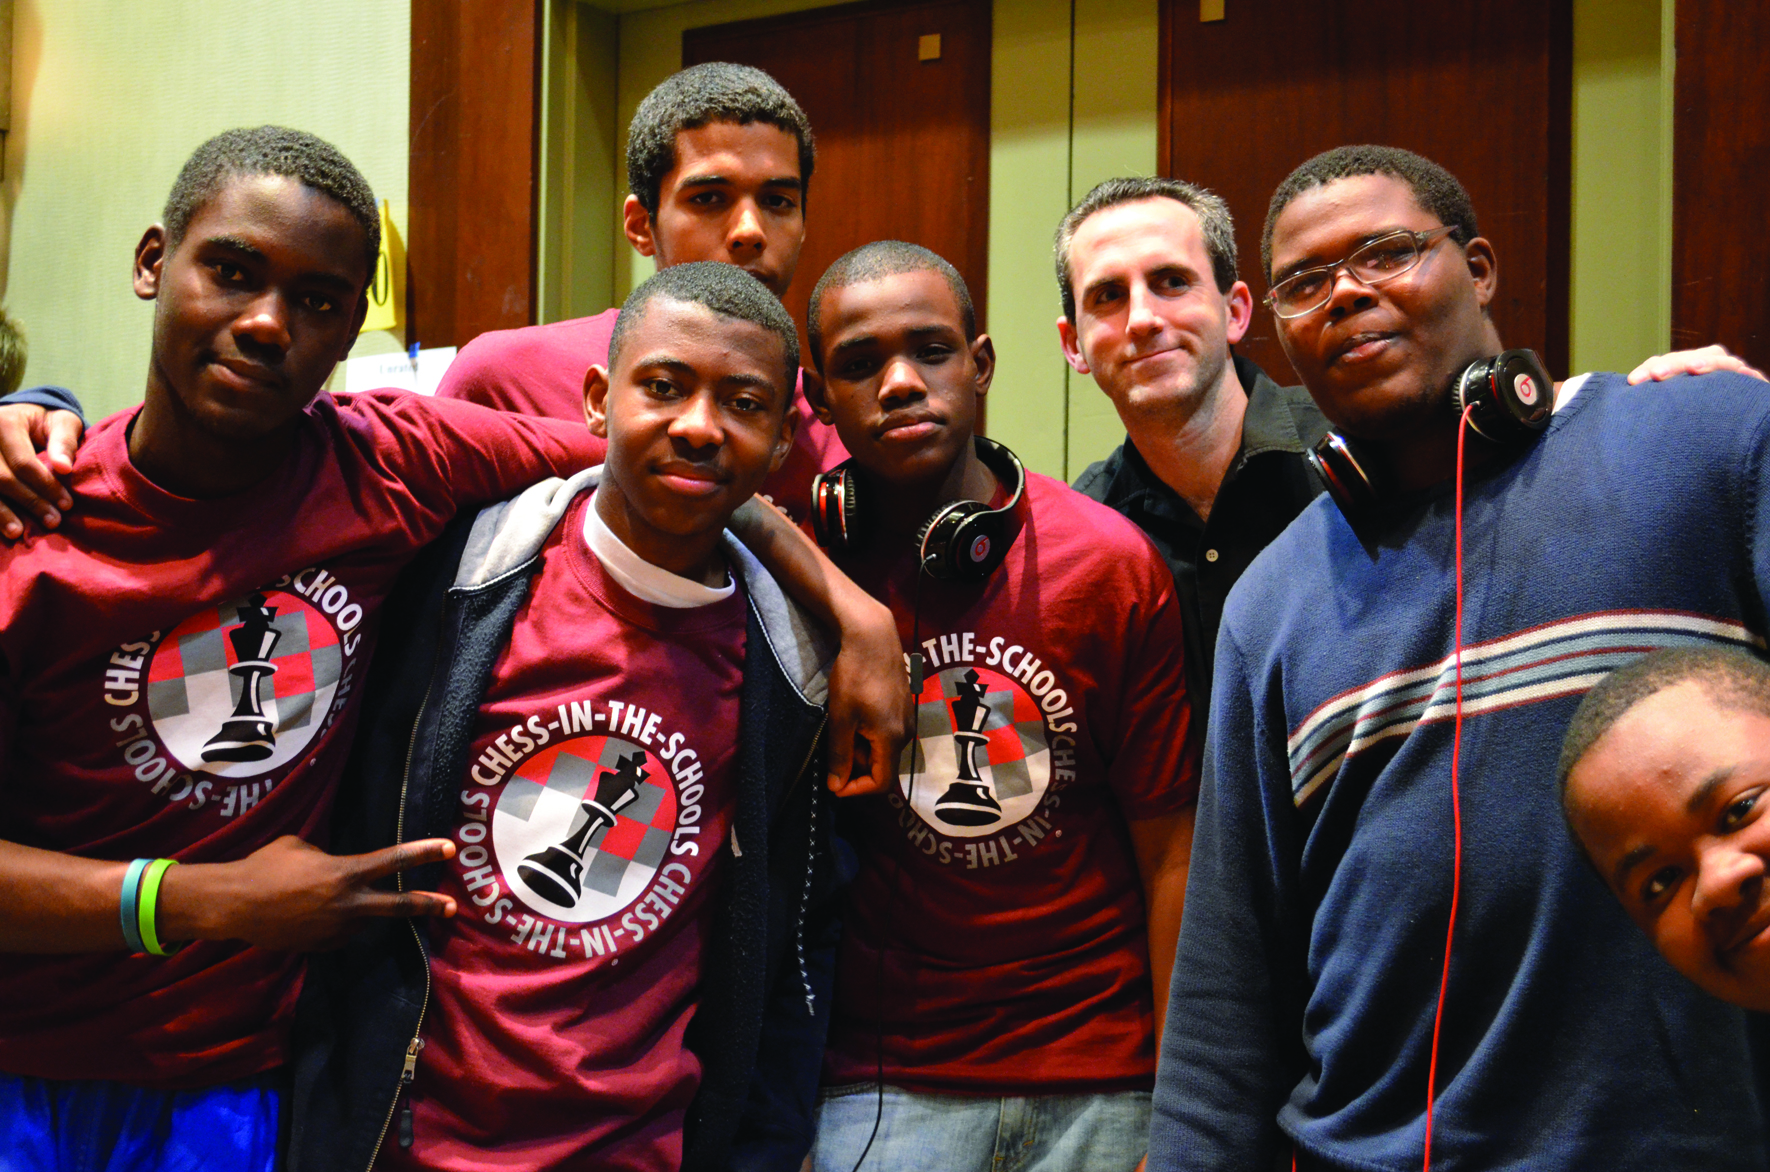 Students participate in the the 2012 Frederick Douglass Academy Nationals in New York City. Chess-inthe- Schools alumni have gone off to MIT, Skidmore, Yale, Wesleyan, Columbia, Union, SUNY Stony Brook, and other institutions of higher learning.